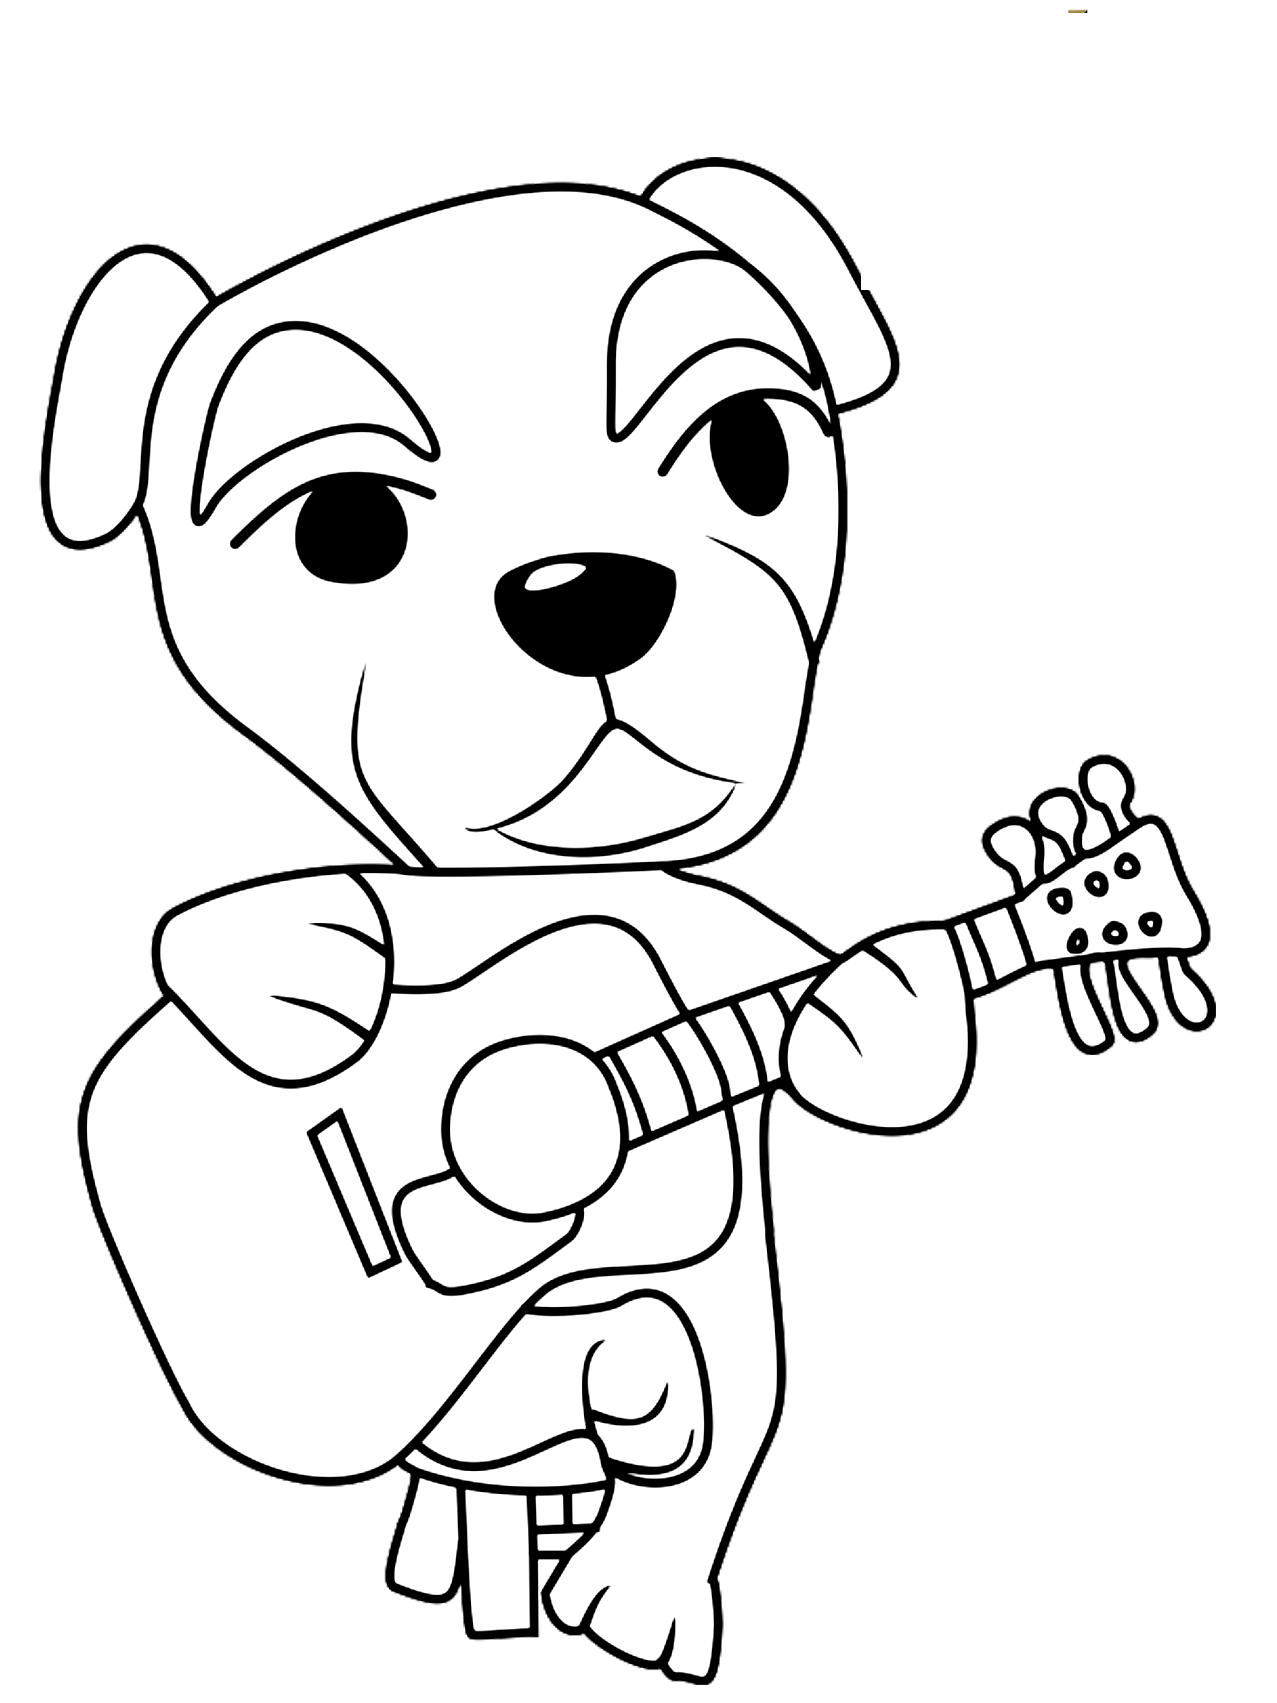 Cute Animal Crossing New Horizons Coloring Pages Pdf - Free Animal Crossing New Horizons Coloring Pages